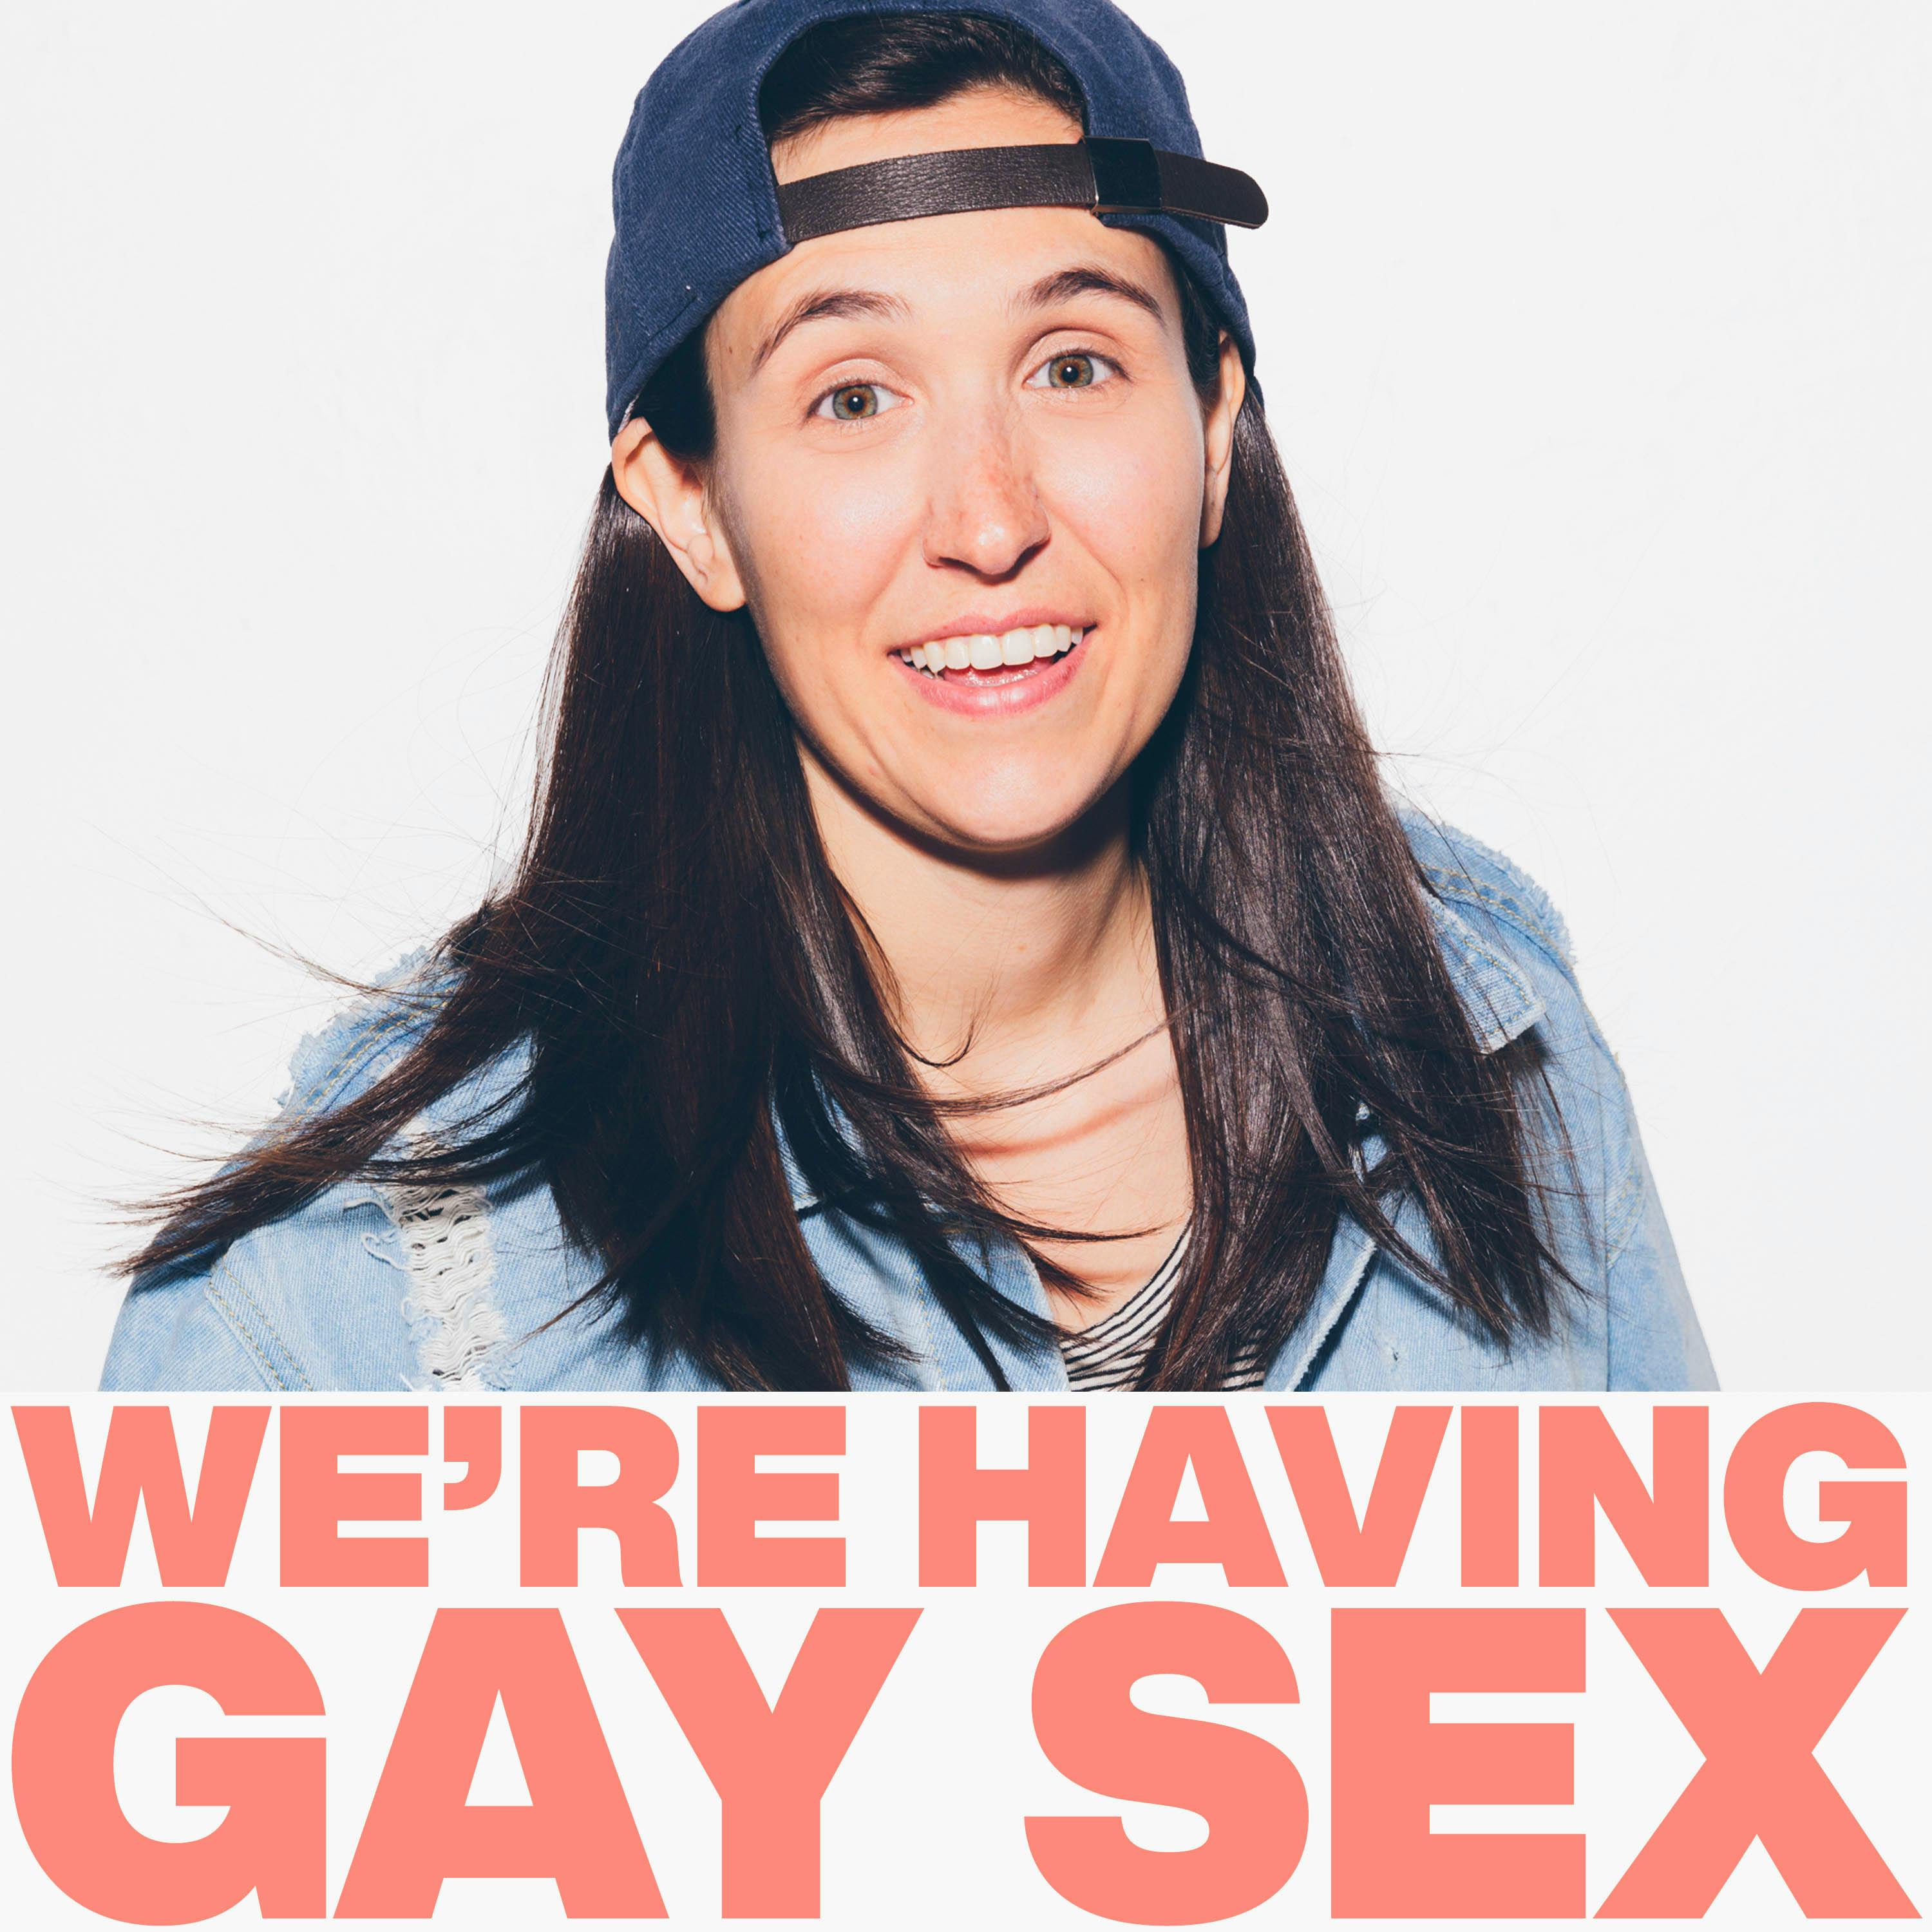 We're Having Gay Sex - Watts the Safeword Queues Up a Quickie | We’re Having Gay Sex Podcast #153